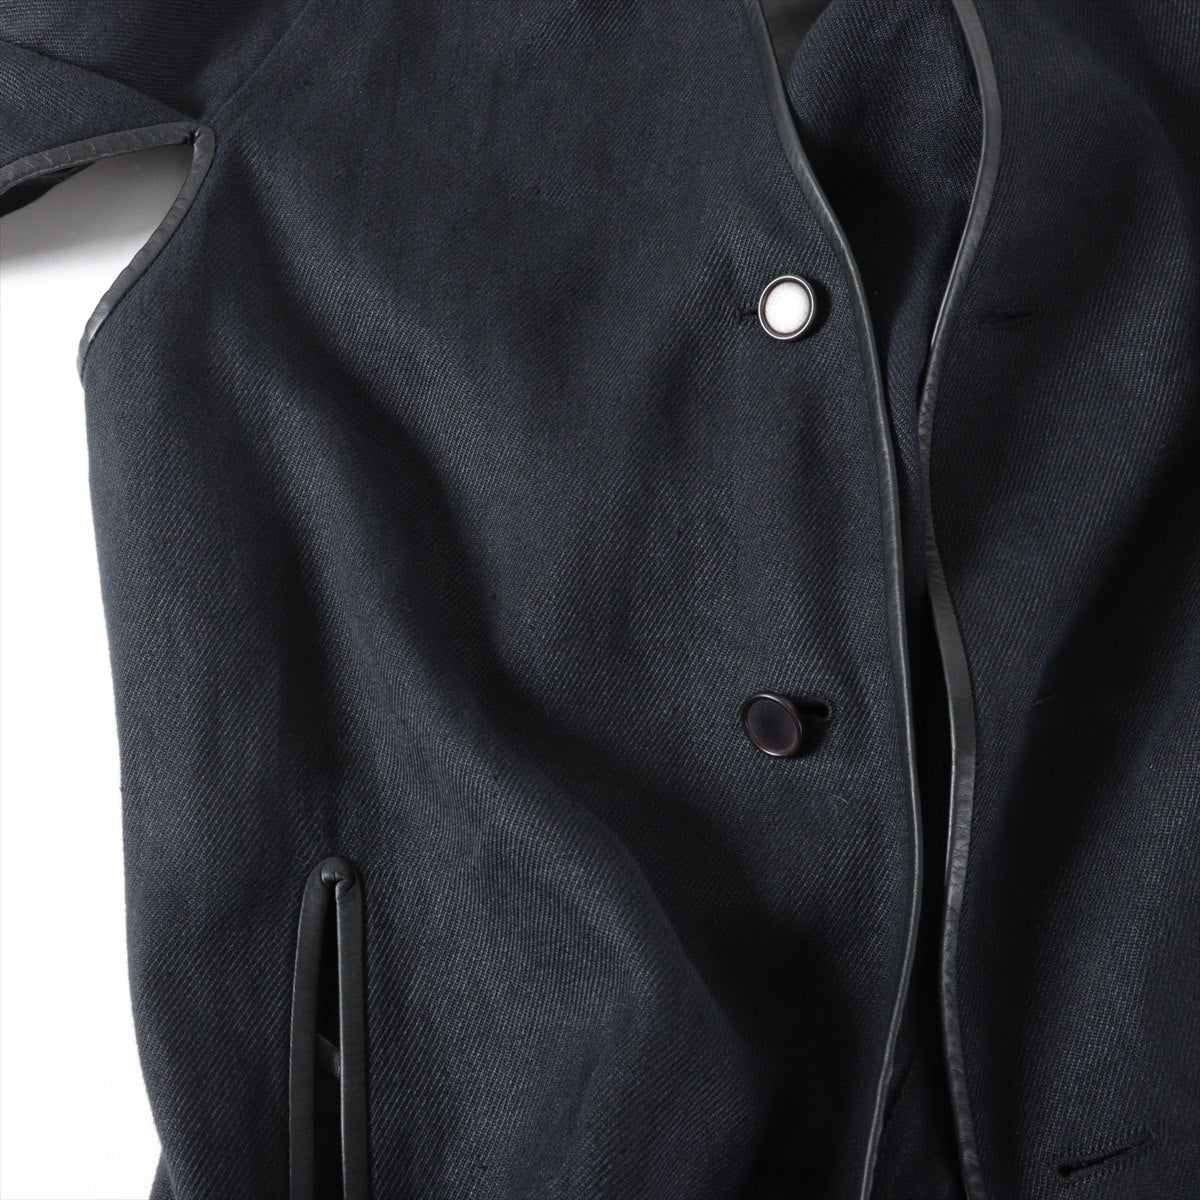 Hermes Margiela Period Linen Jacket 38  Black Third Button Parts able Several s in the Three Halls